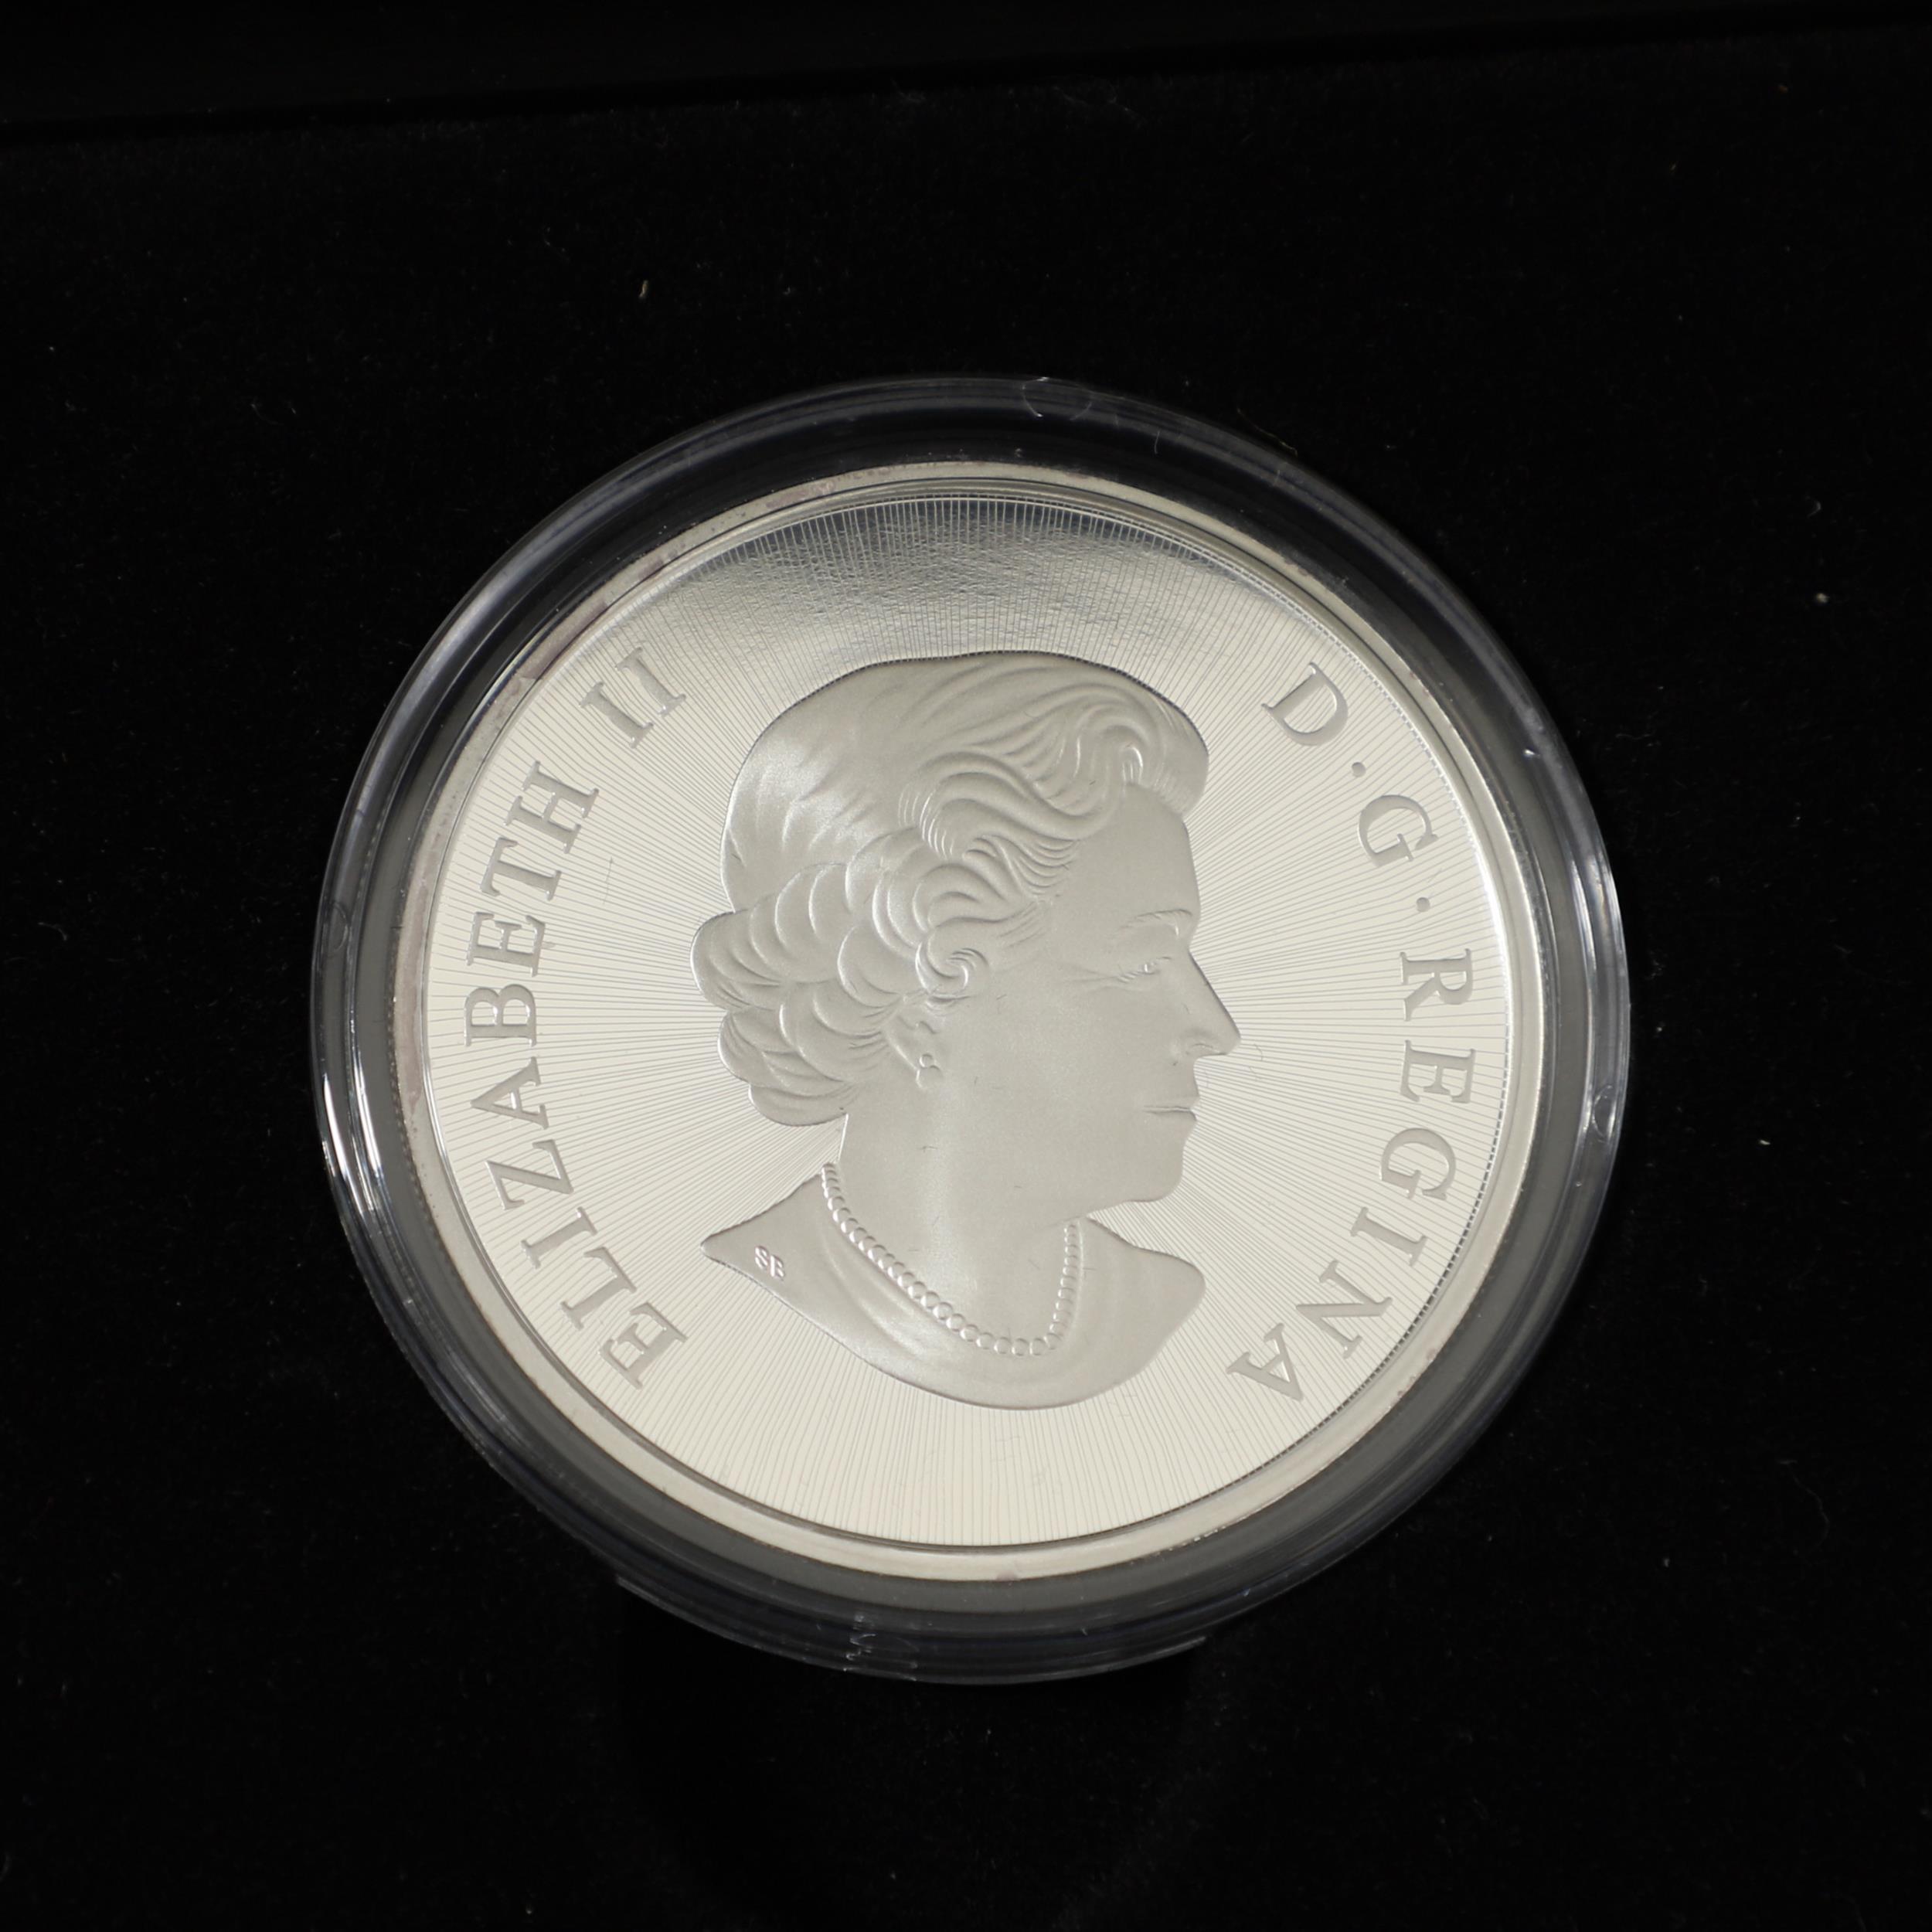 AN ELIZABETH II ROYAL CANADIAN MINT SILVER FIVE COIN 'MAPLE MASTERS' COLLECTION. 2019. - Bild 4 aus 15